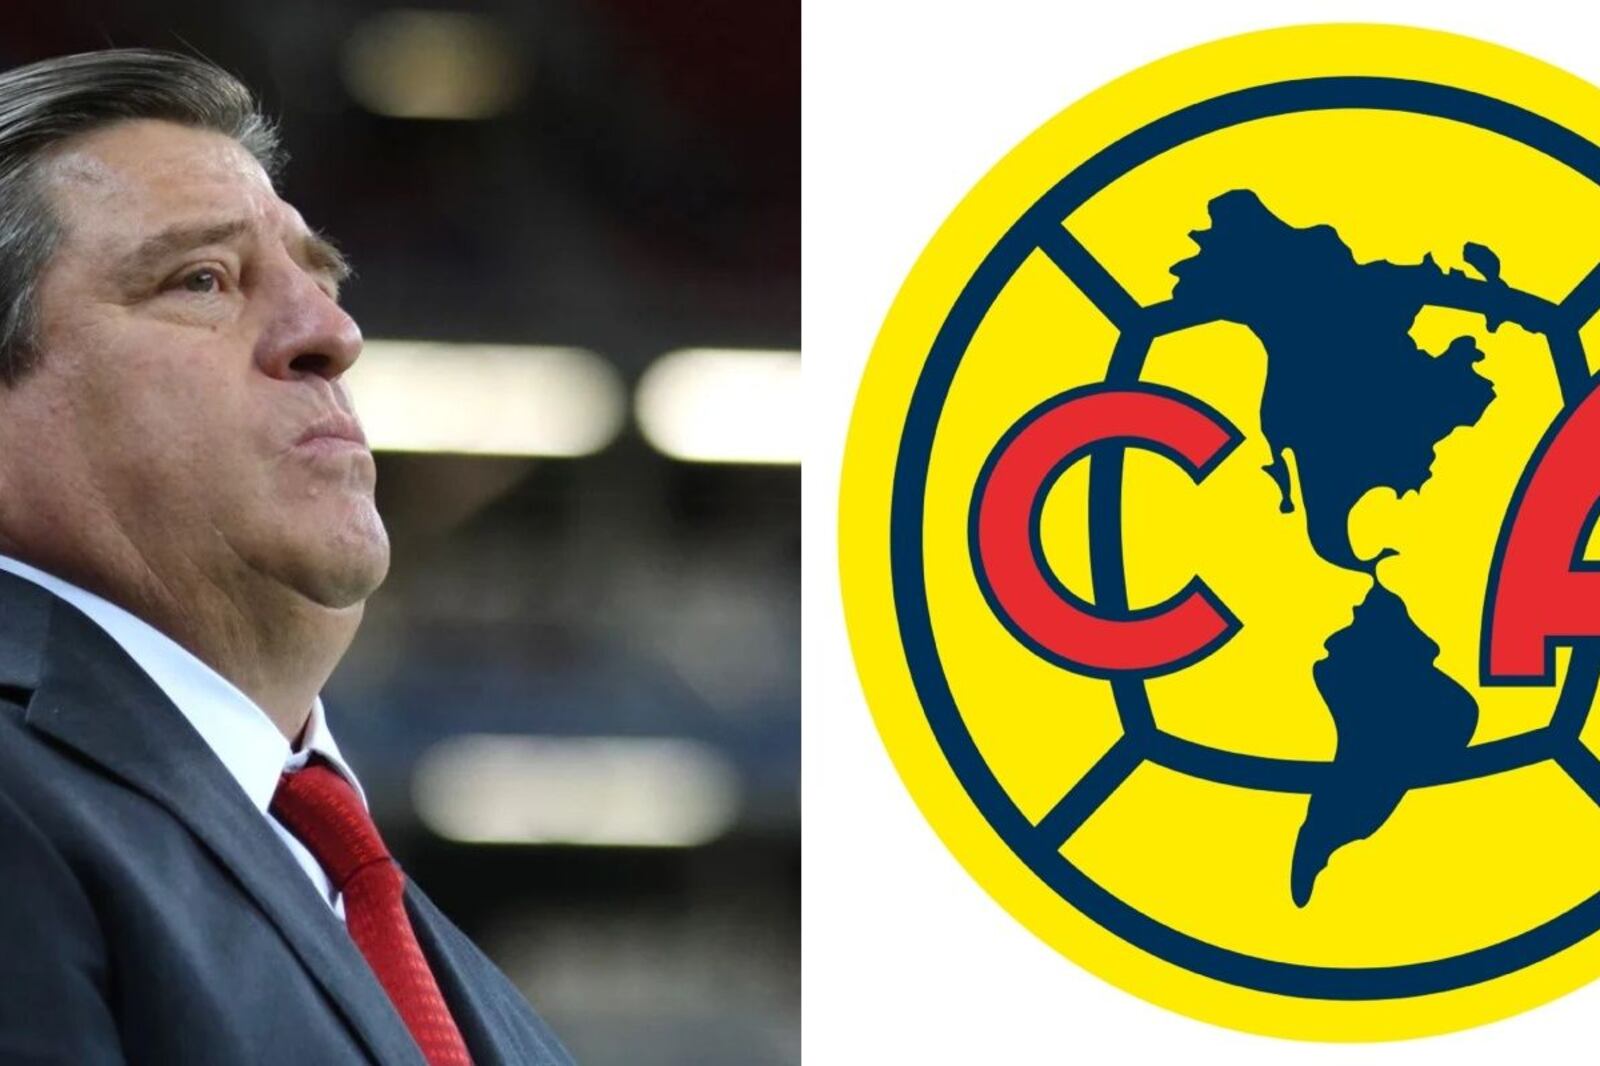 Miguel Herrera blocks this player and now suffers his karma at the Azteca Stadium